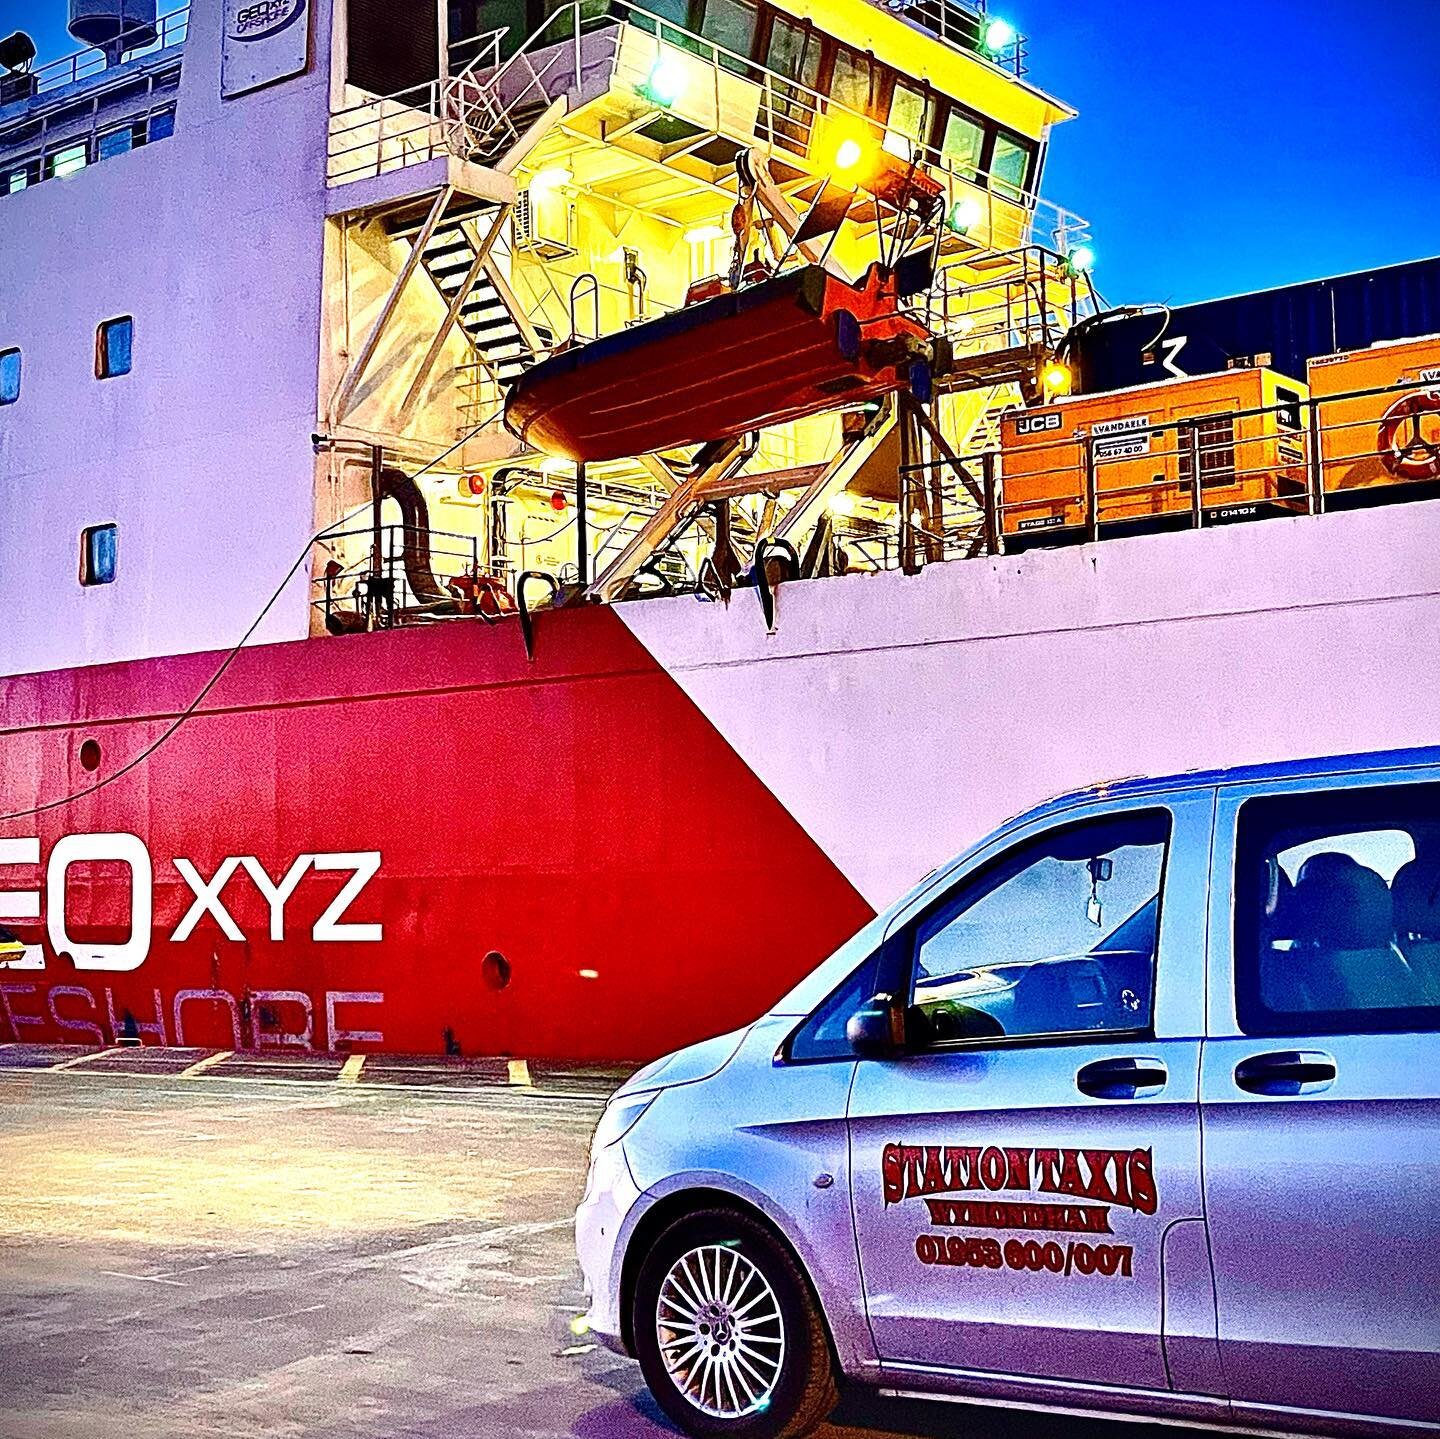 Somewhere a little different for us in the early hours.....off to the Gt.Yarmouth docks. #geooceans #docks #greatyarmouth #greatyarmouthseafront #ships #offshore #sea #taxi #wymondham #norfolk @simonleeder_ @leederkate1